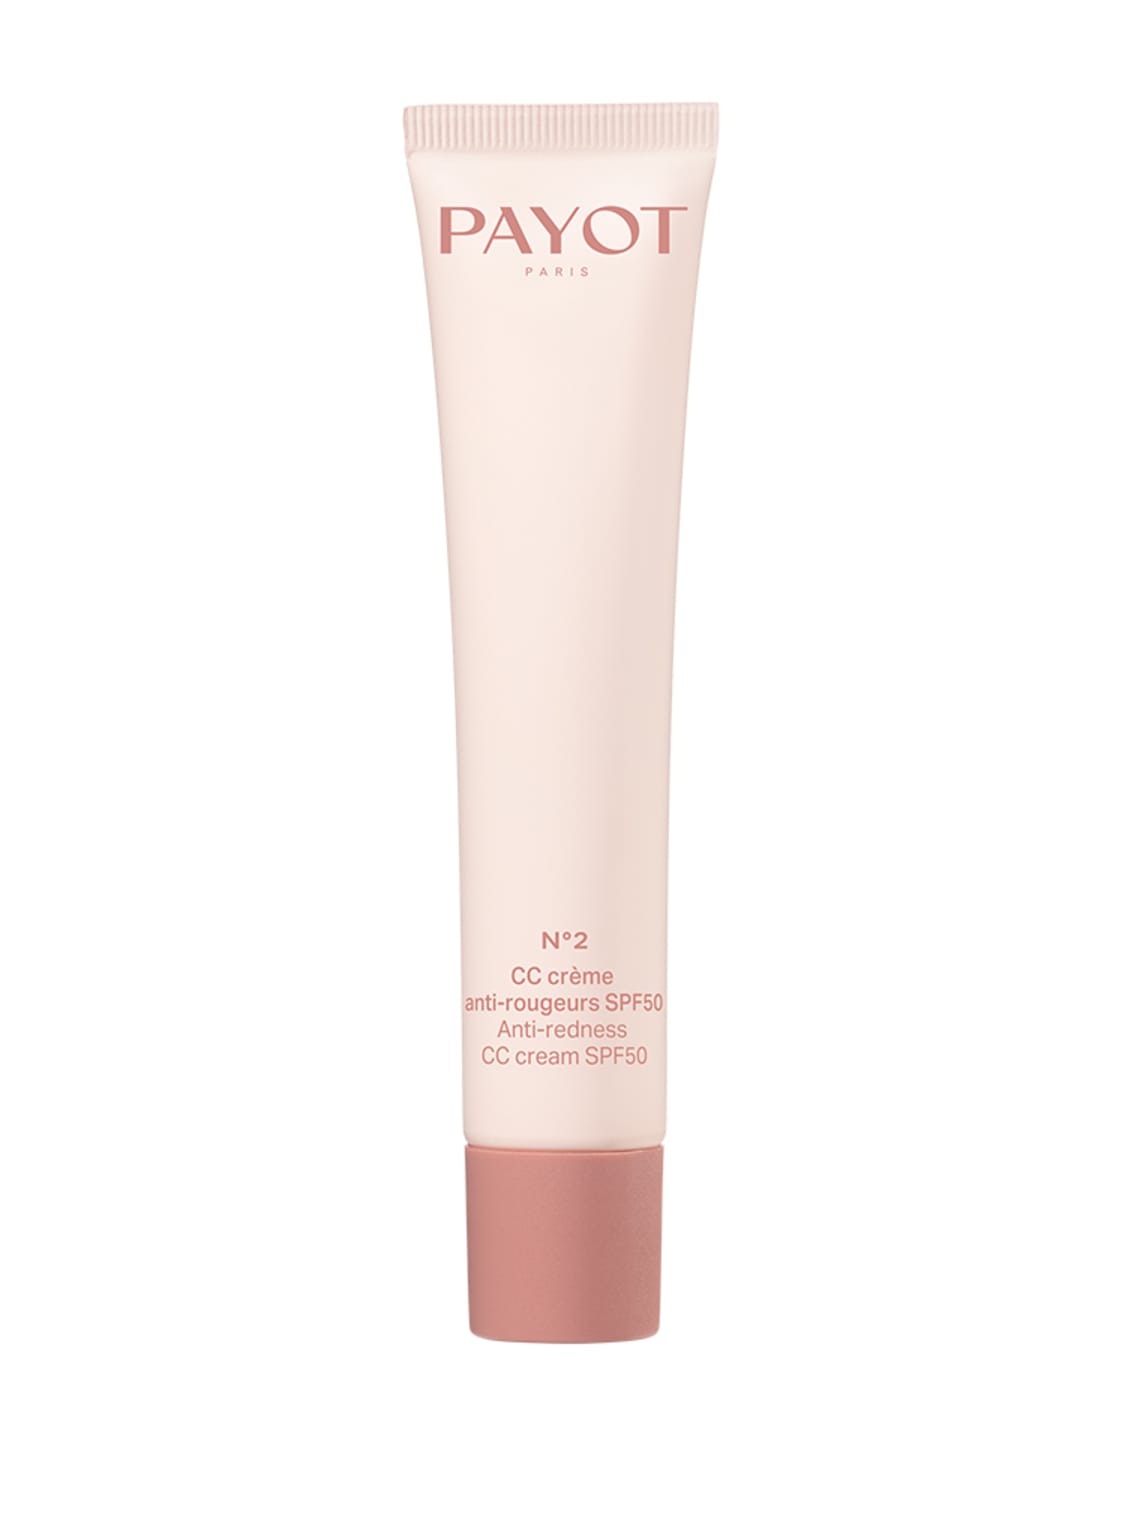 Payot N°2 CC Créme anti-rougeurs SPF50 von PAYOT